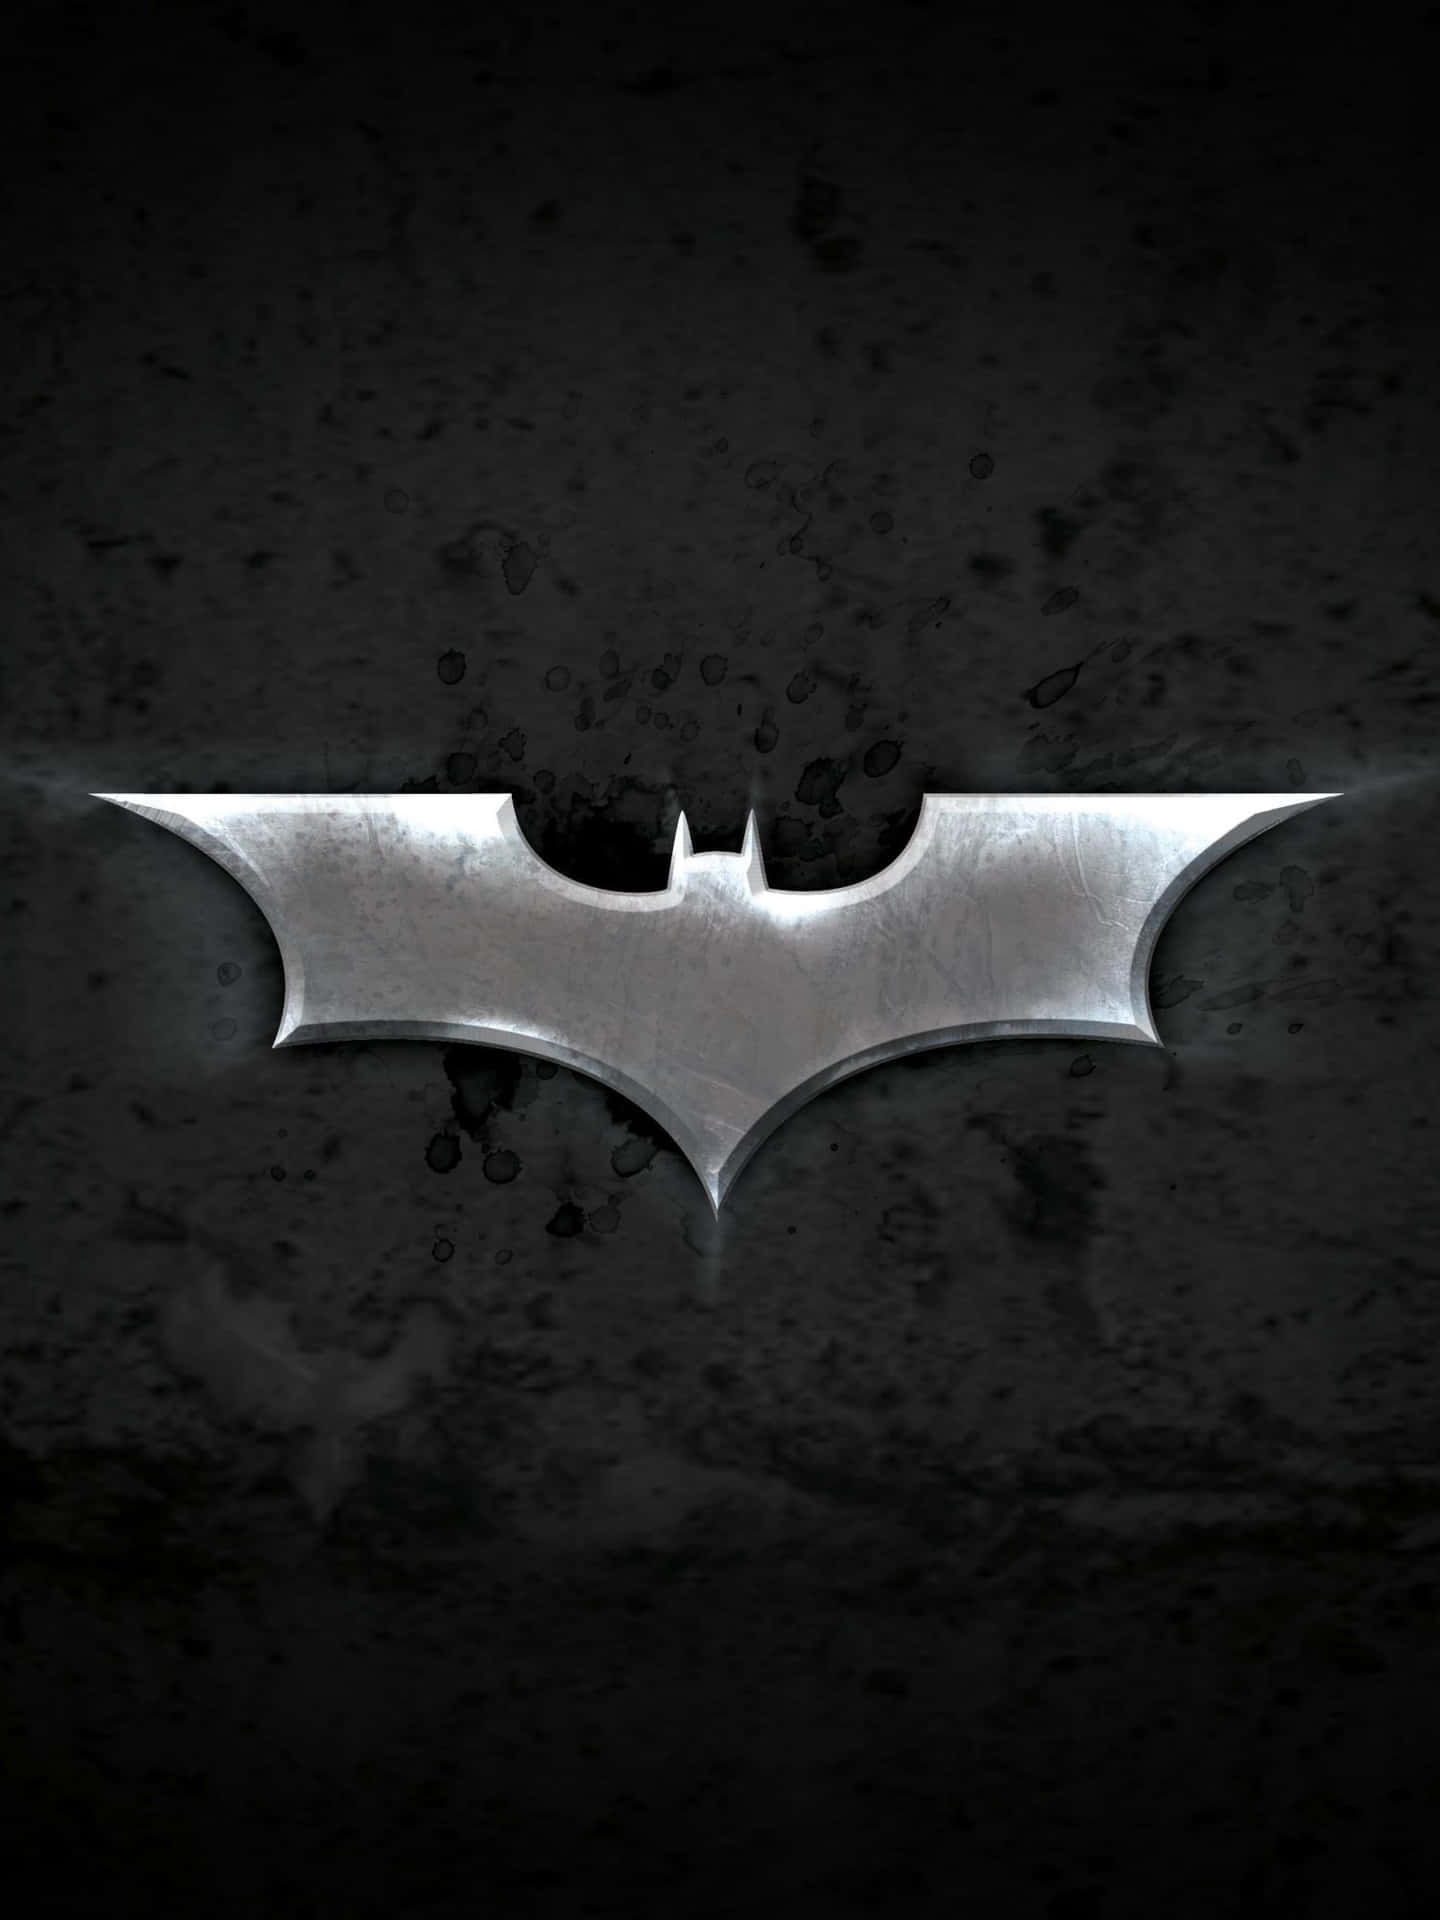 Feel the power of the bat in your hands with the Batman Tablet Wallpaper